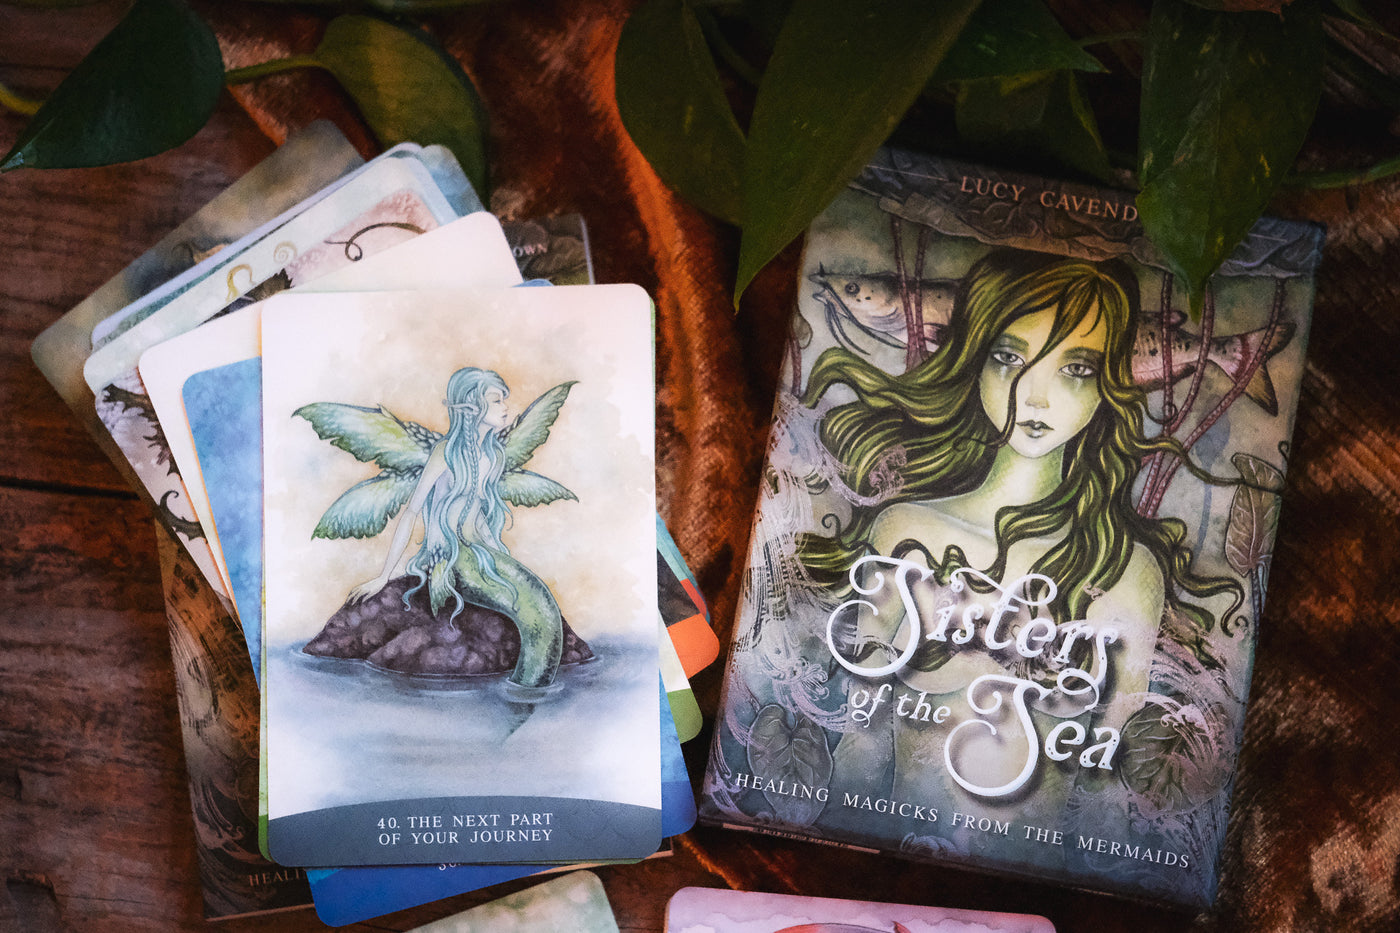 Sisters of the Sea: Healing Magicks from the Mermaids